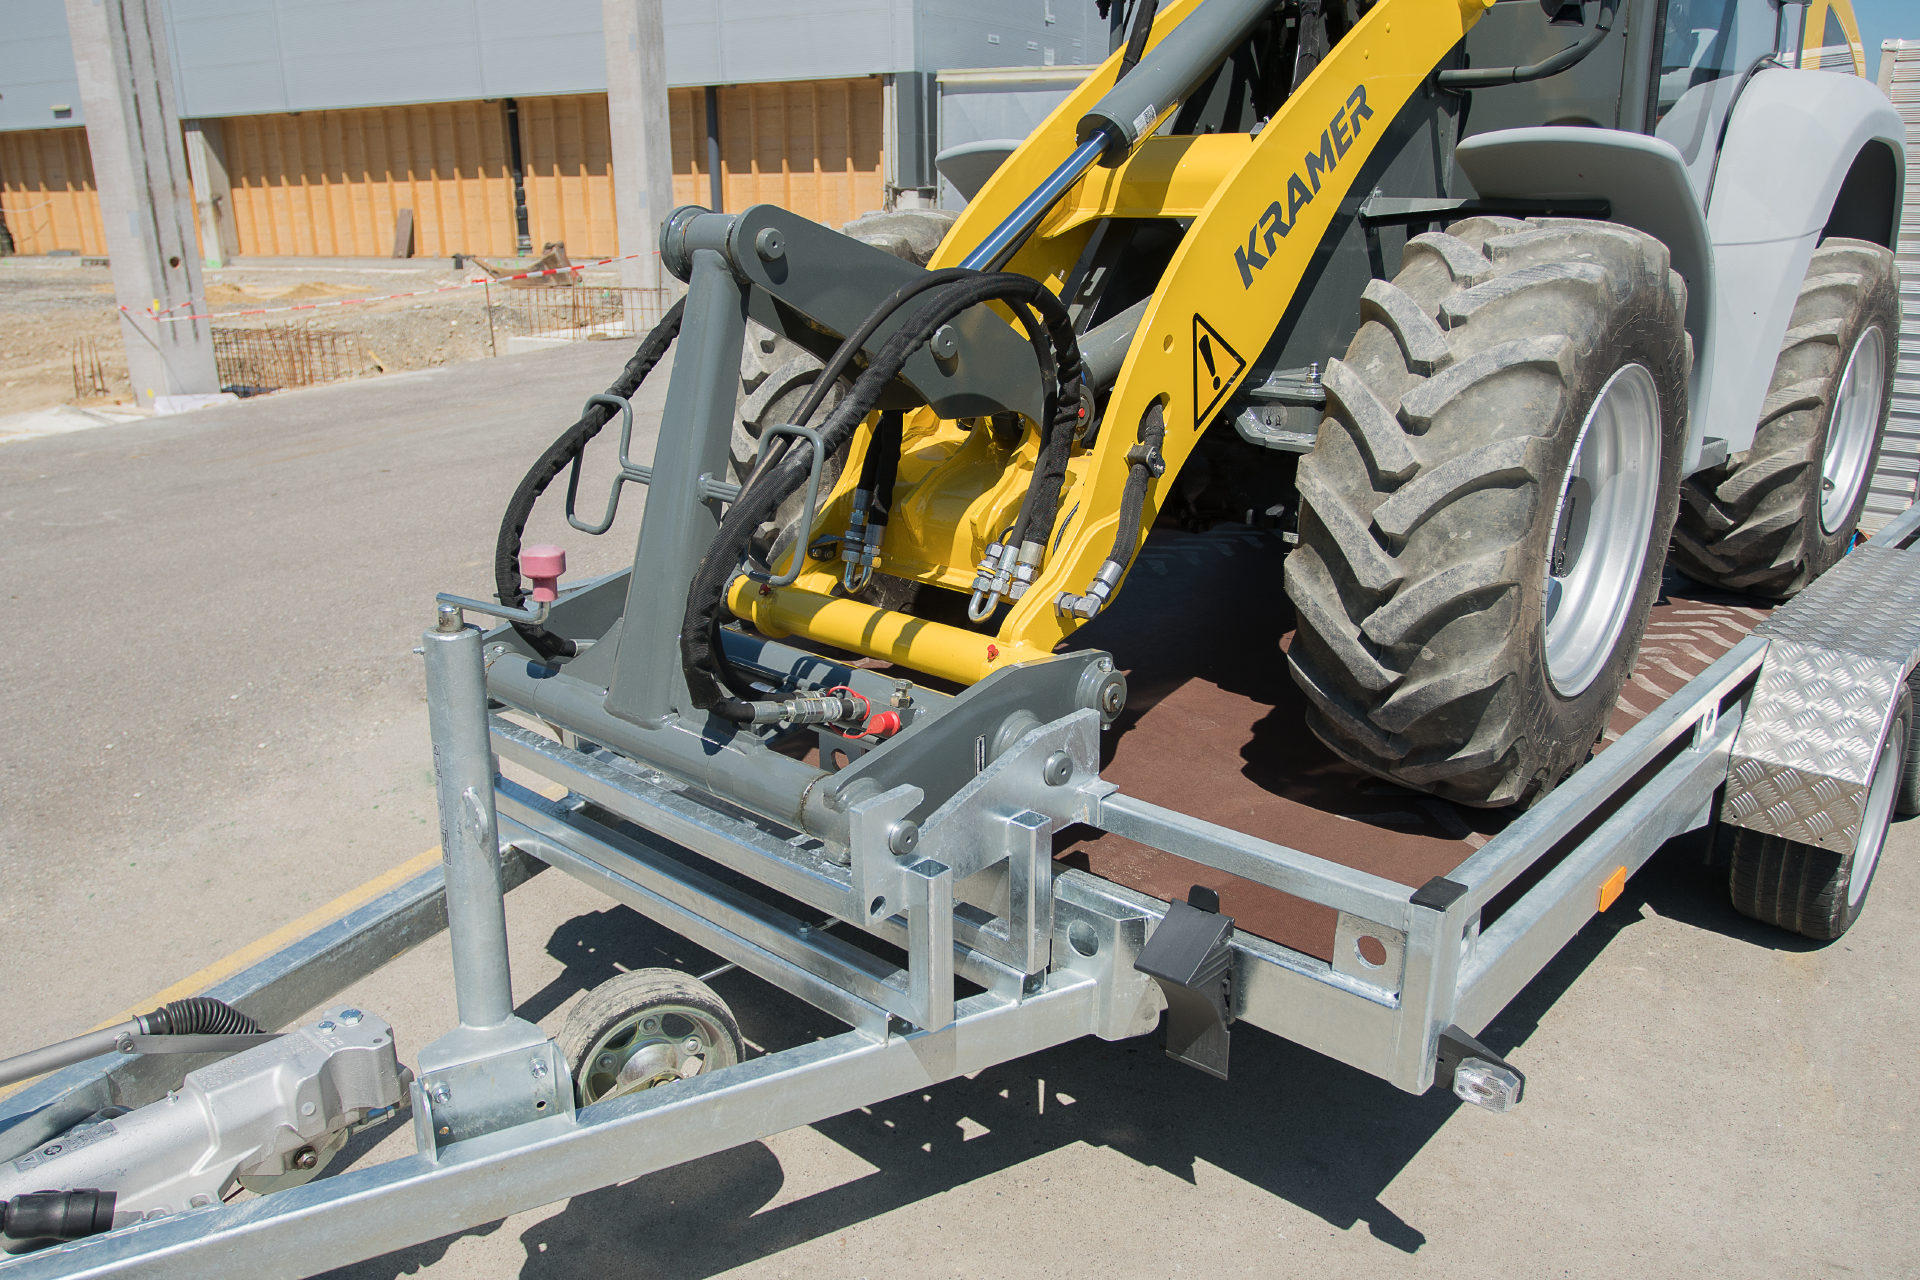 The Kramer wheel loader 5050 with locked quickhitch plate on a trailer.